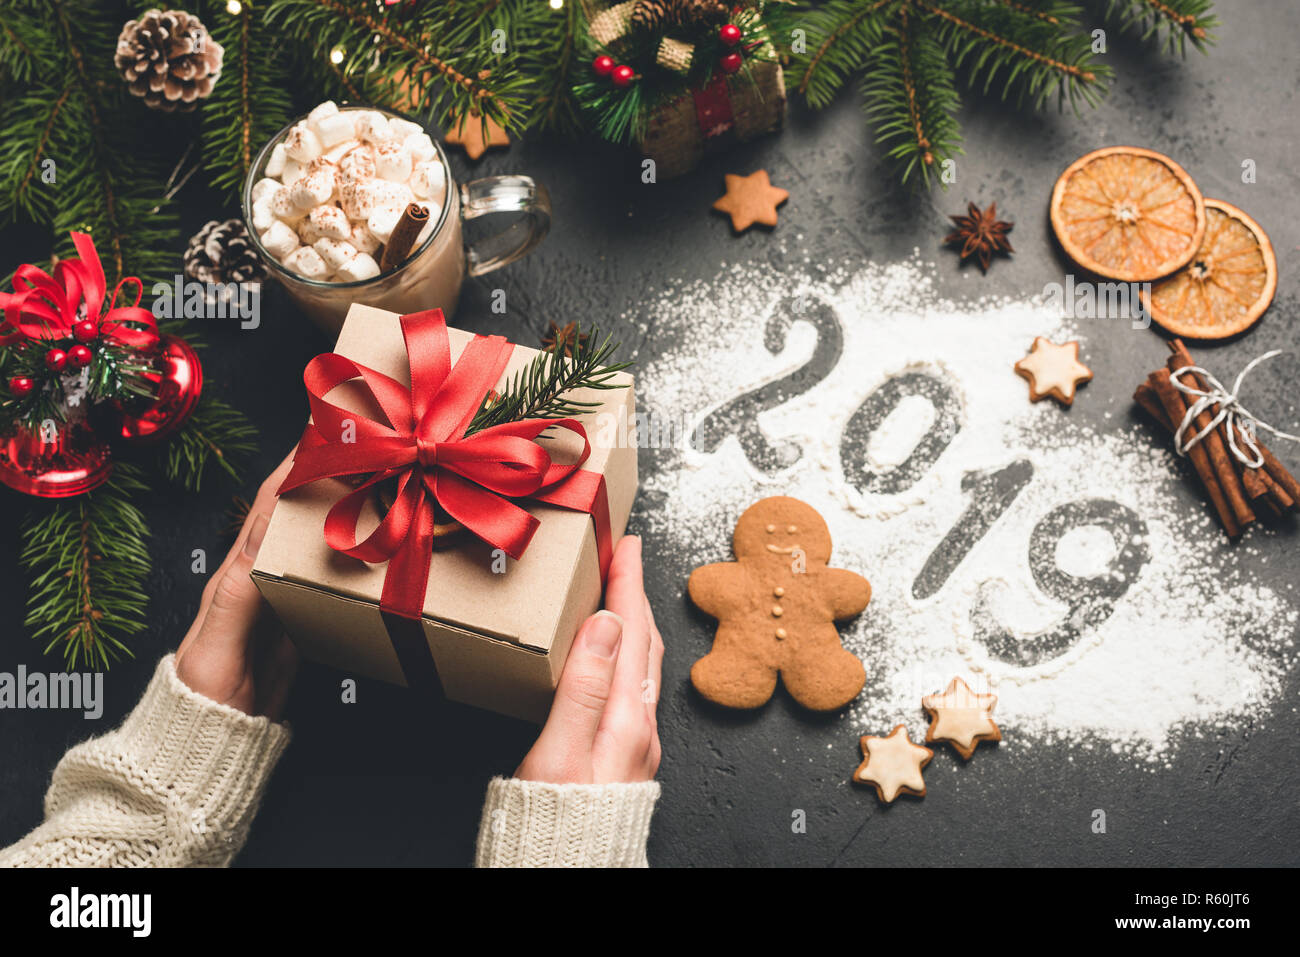 Gift box and 2019 greeting written on flour. Female hands holding Christmas gift box Stock Photo